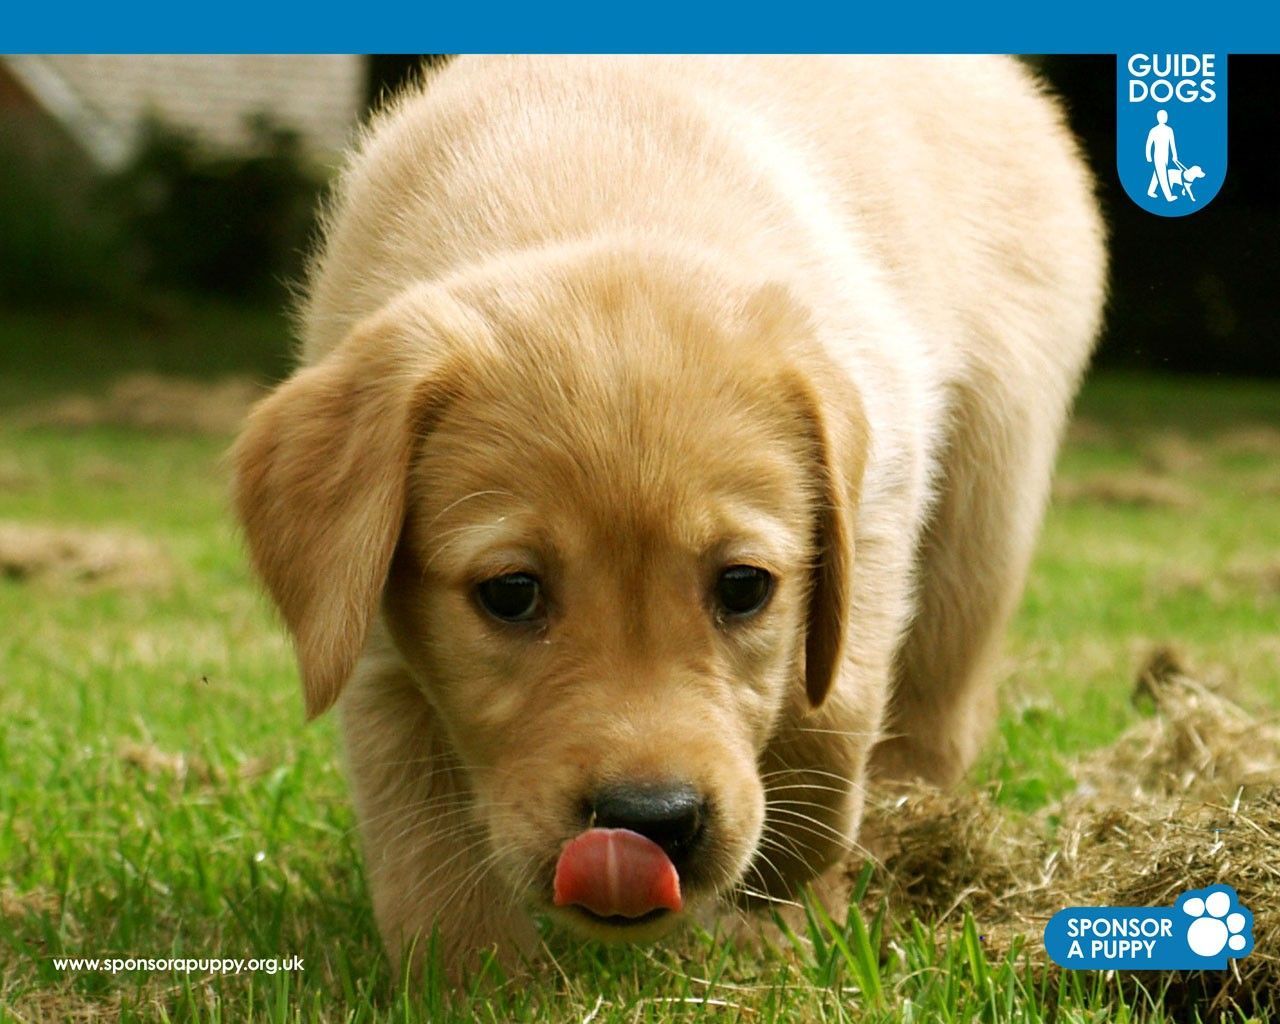 Sponsor a Puppy Playzone - Wallpapers and Games Guide Dogs